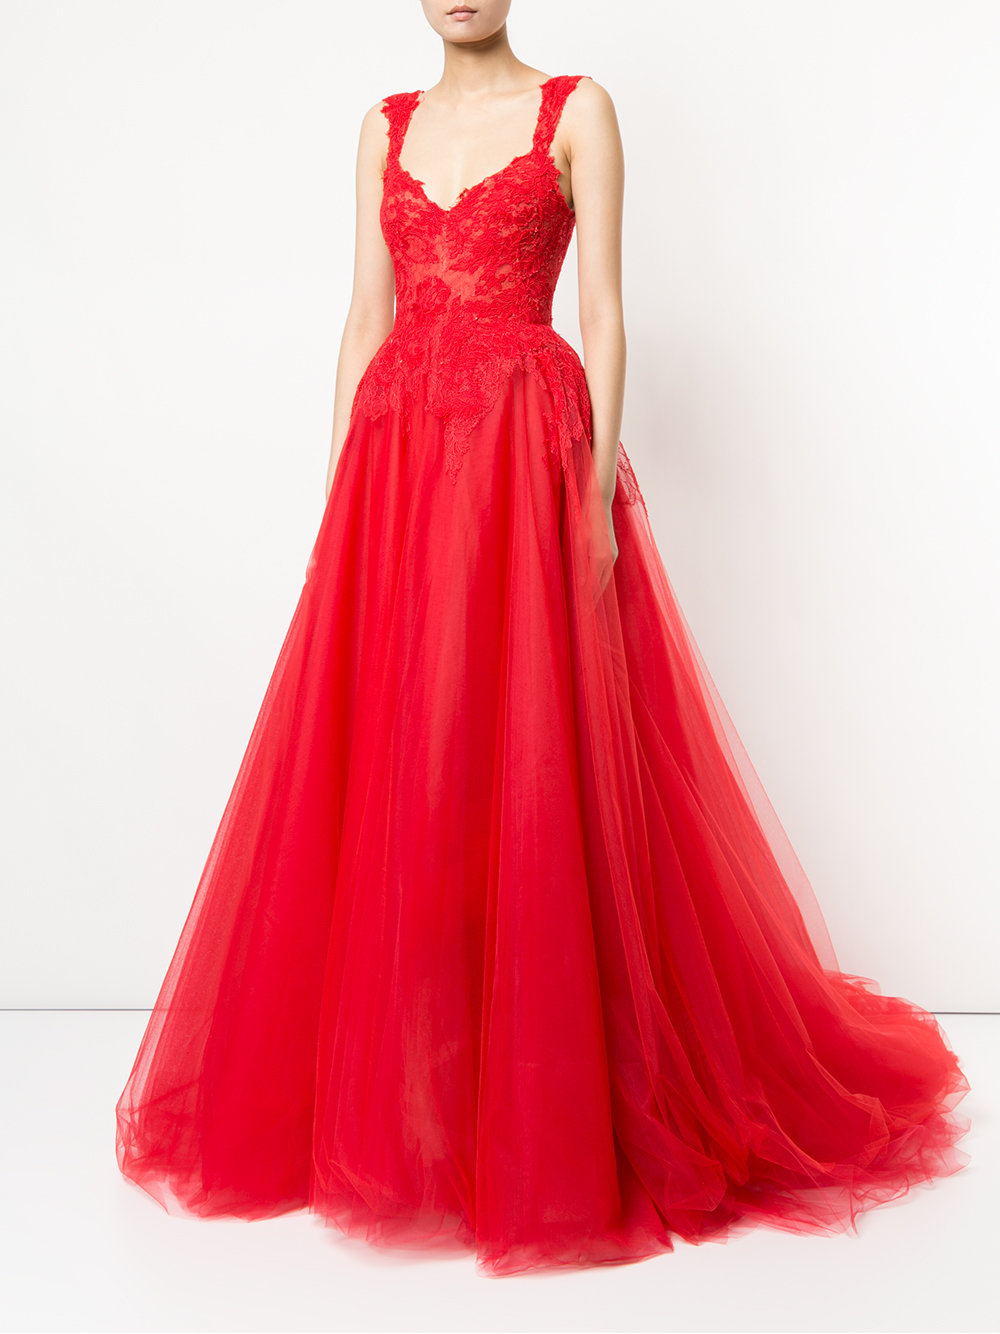 Monique Lhuillier Lace-Embroidered Flared Ball Gown 